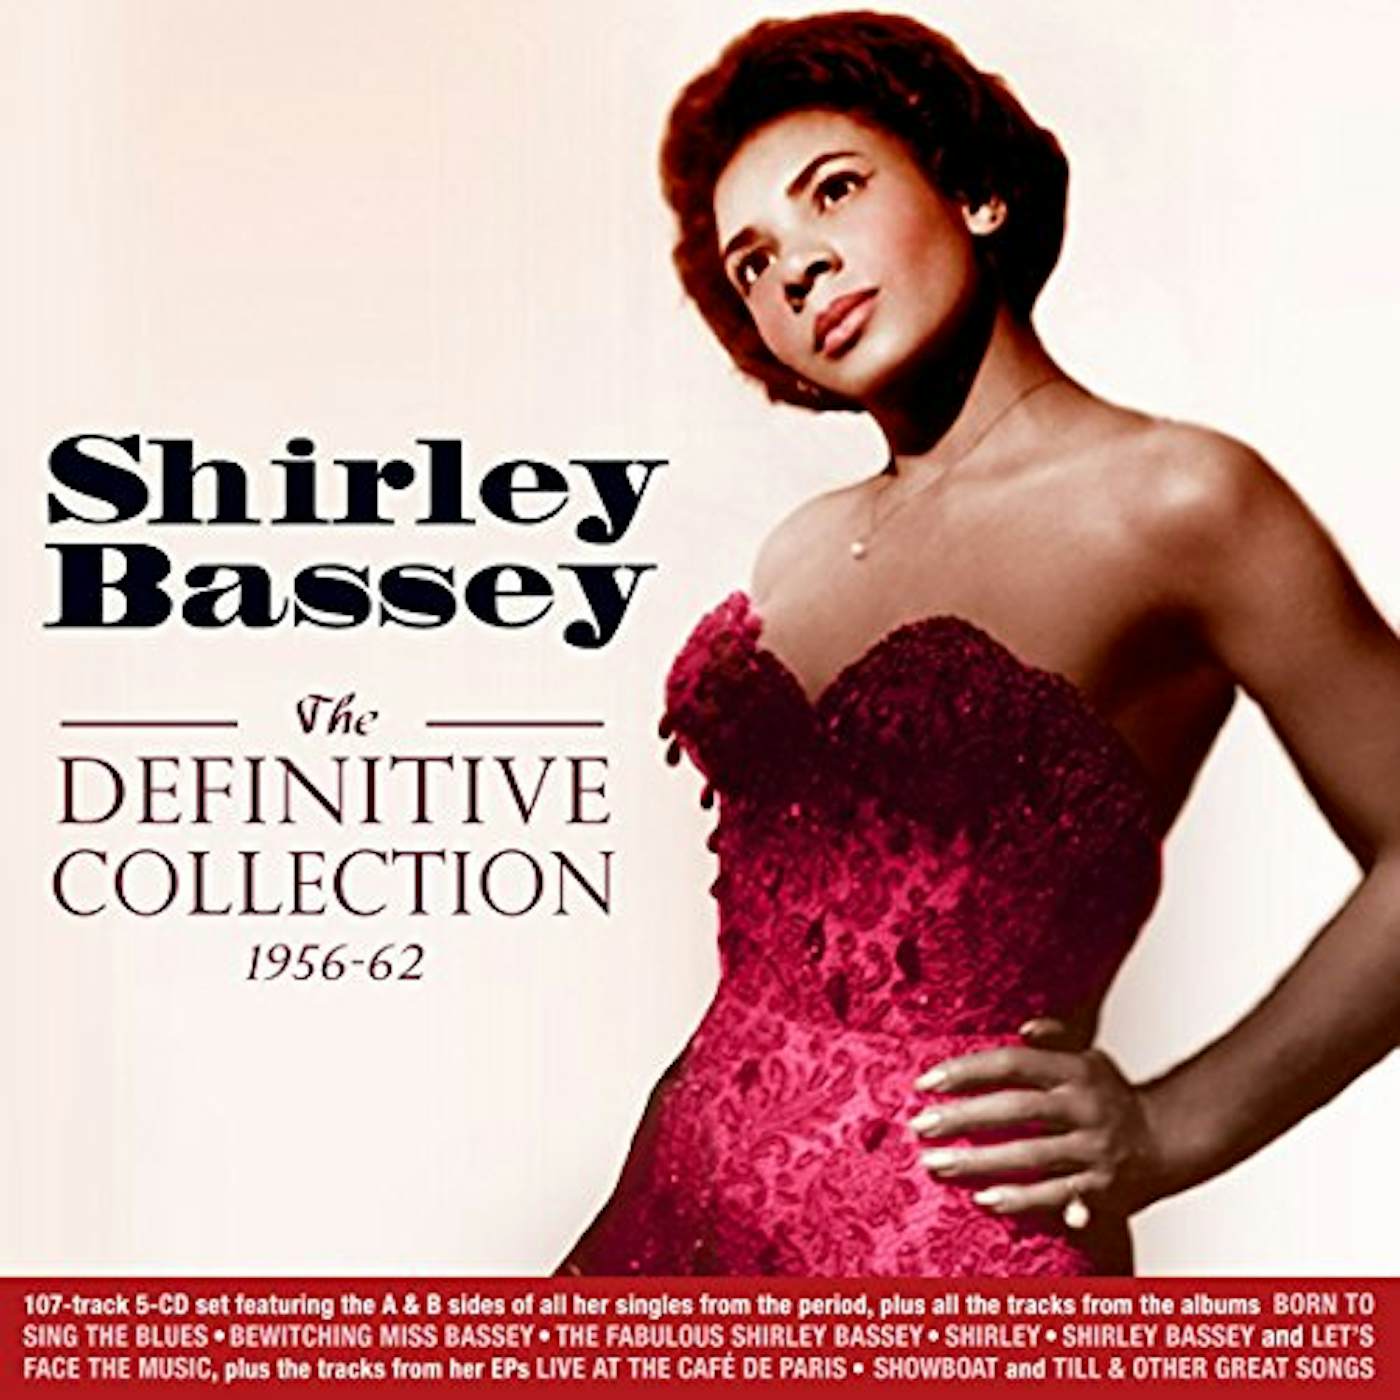 Shirley Bassey DEFINITIVE COLLECTION 1956-62 CD